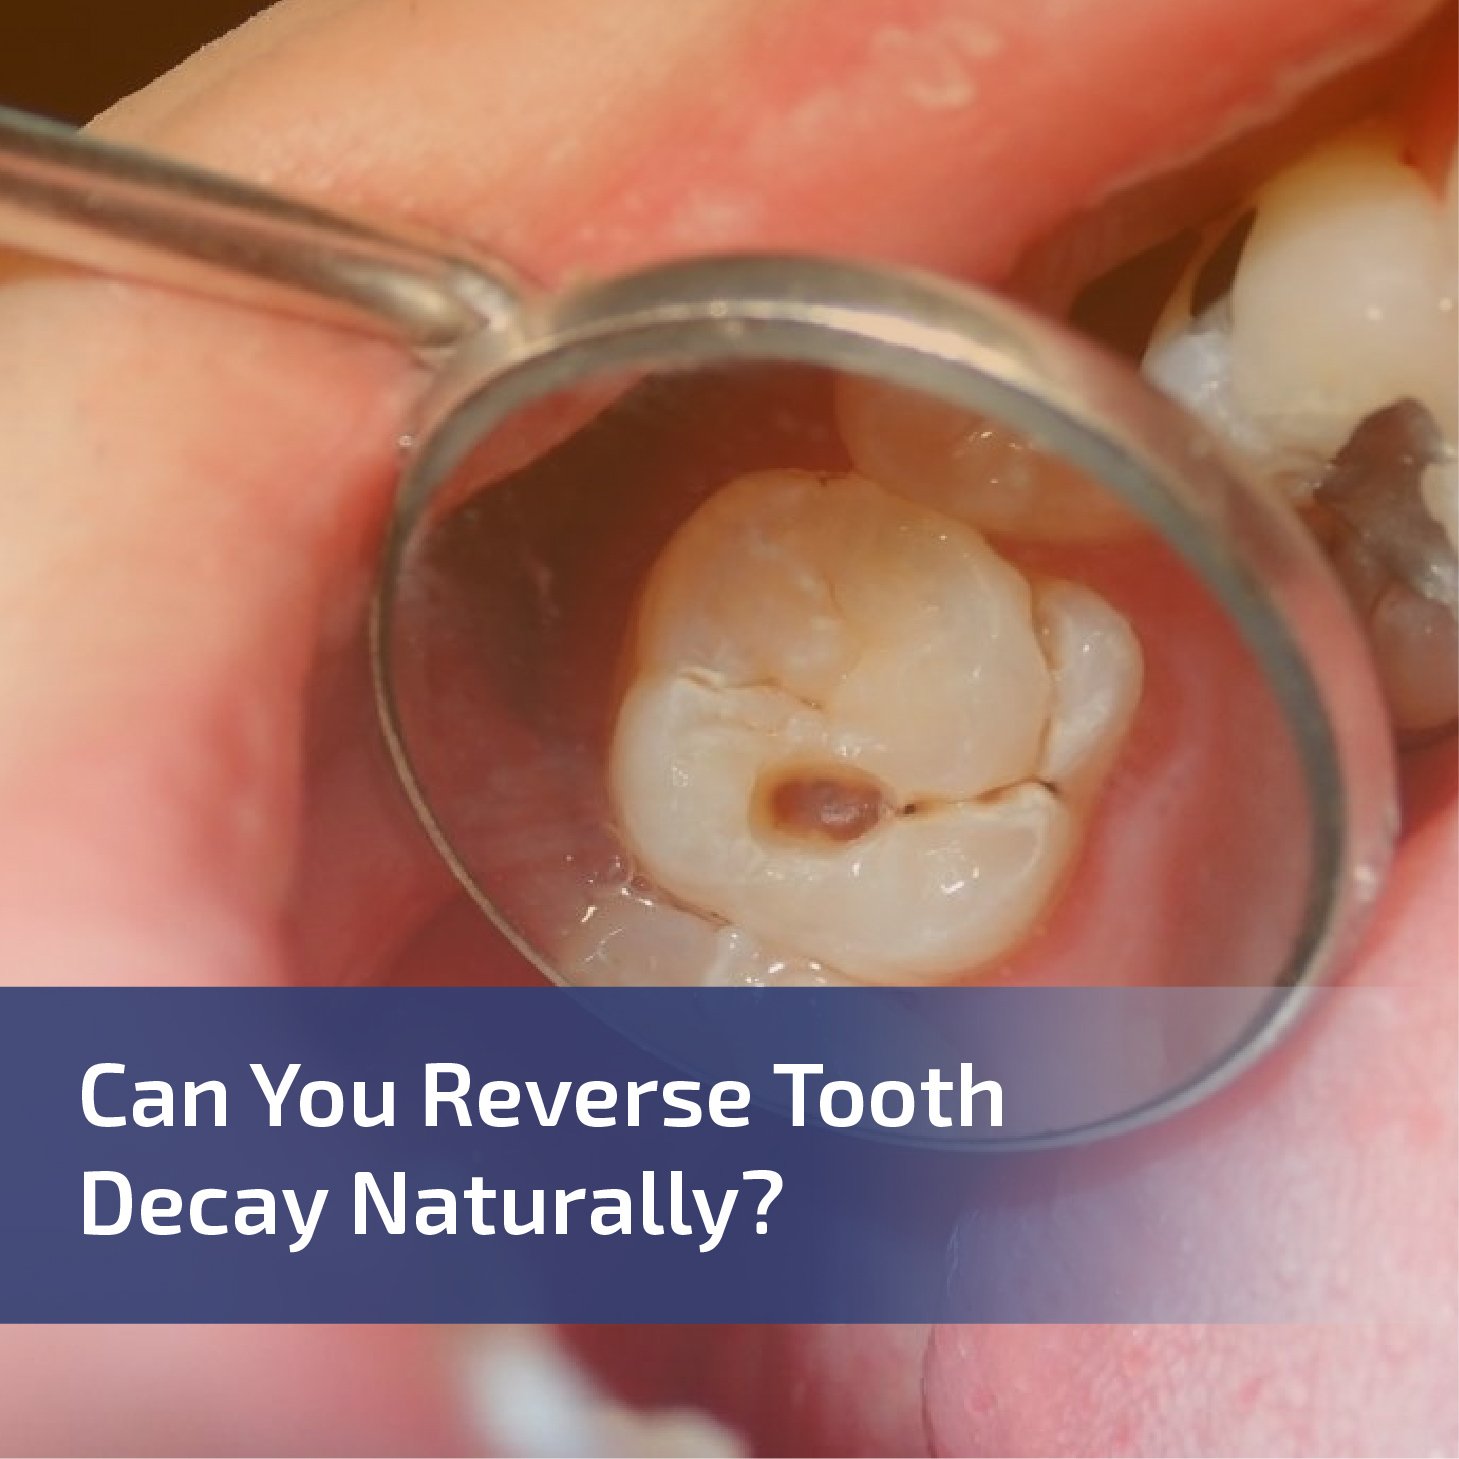 Can You Reverse Tooth Decay Naturally?